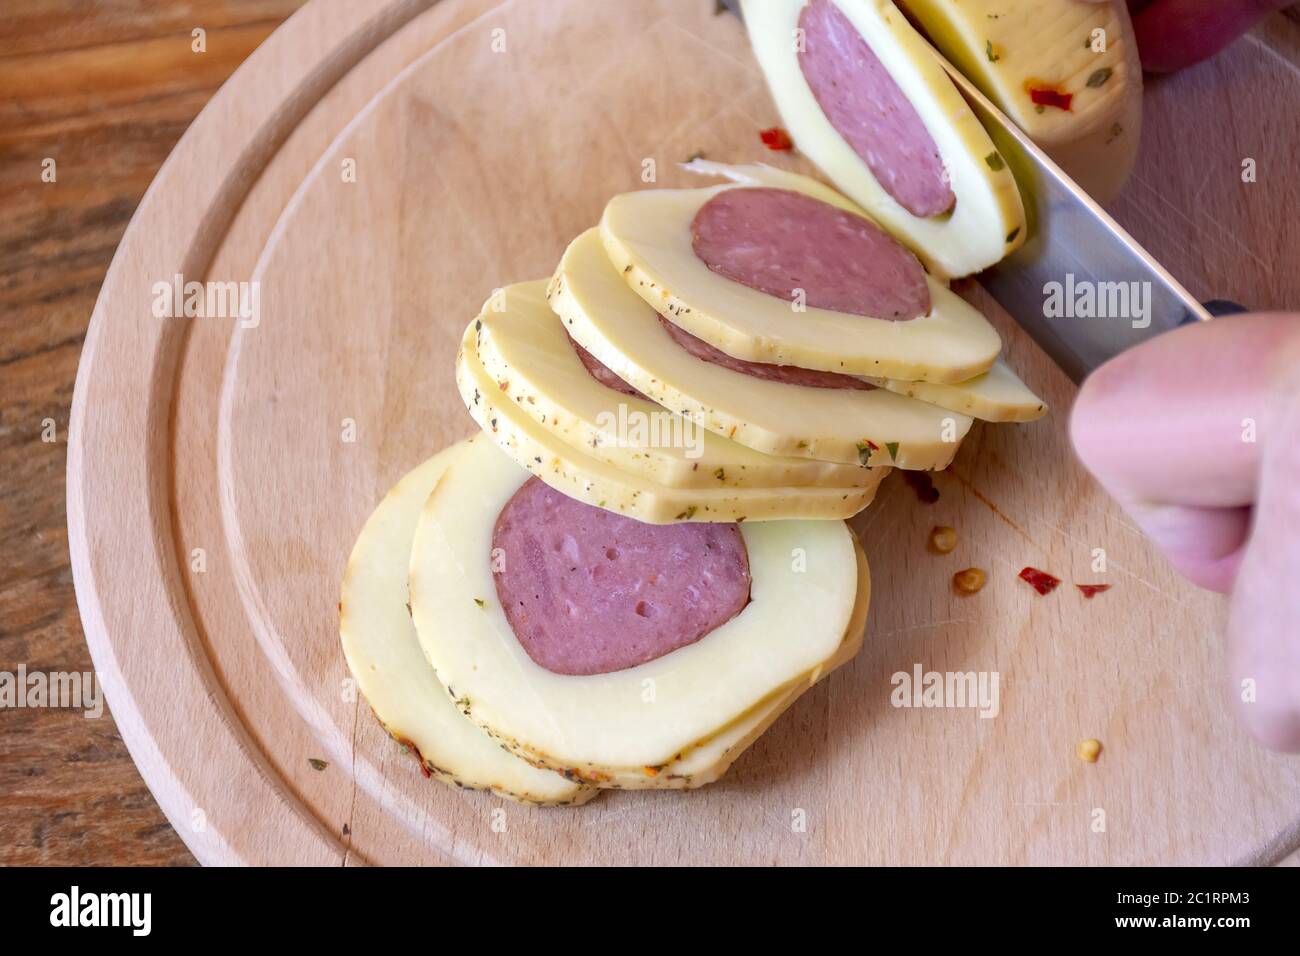 Hand cutting cheese stuffed in round slices Stock Photo